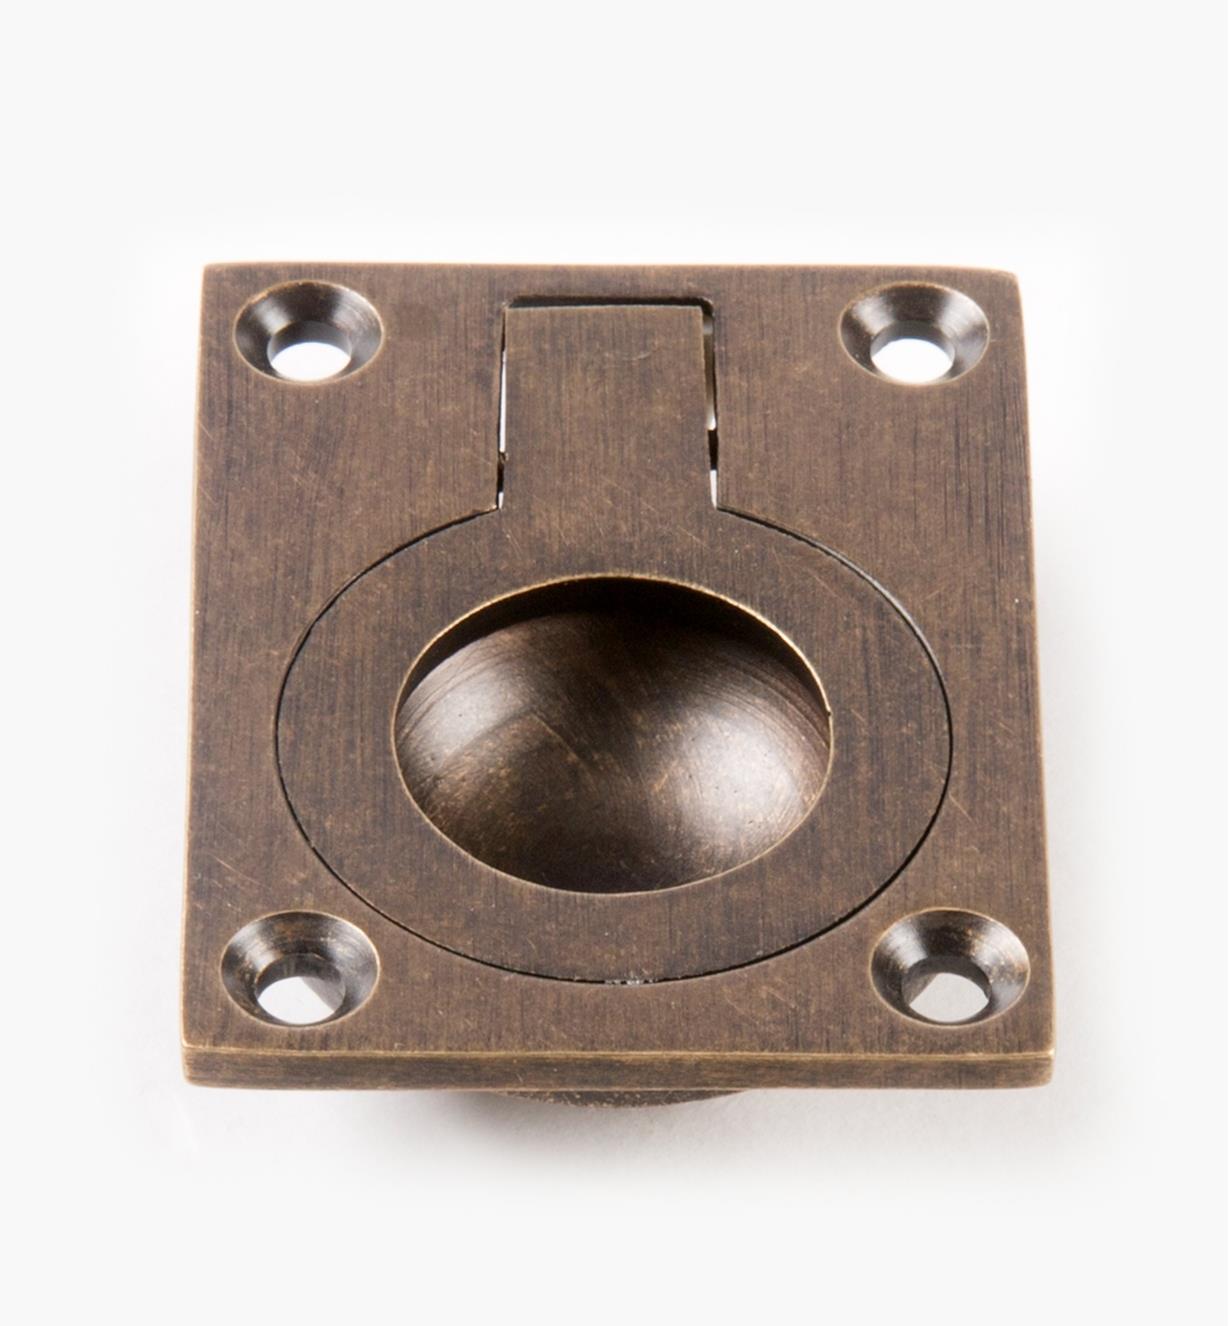 00A1834 - Campaign-Style 1 1/2" × 1 15/16" Rectangular Ring Pull